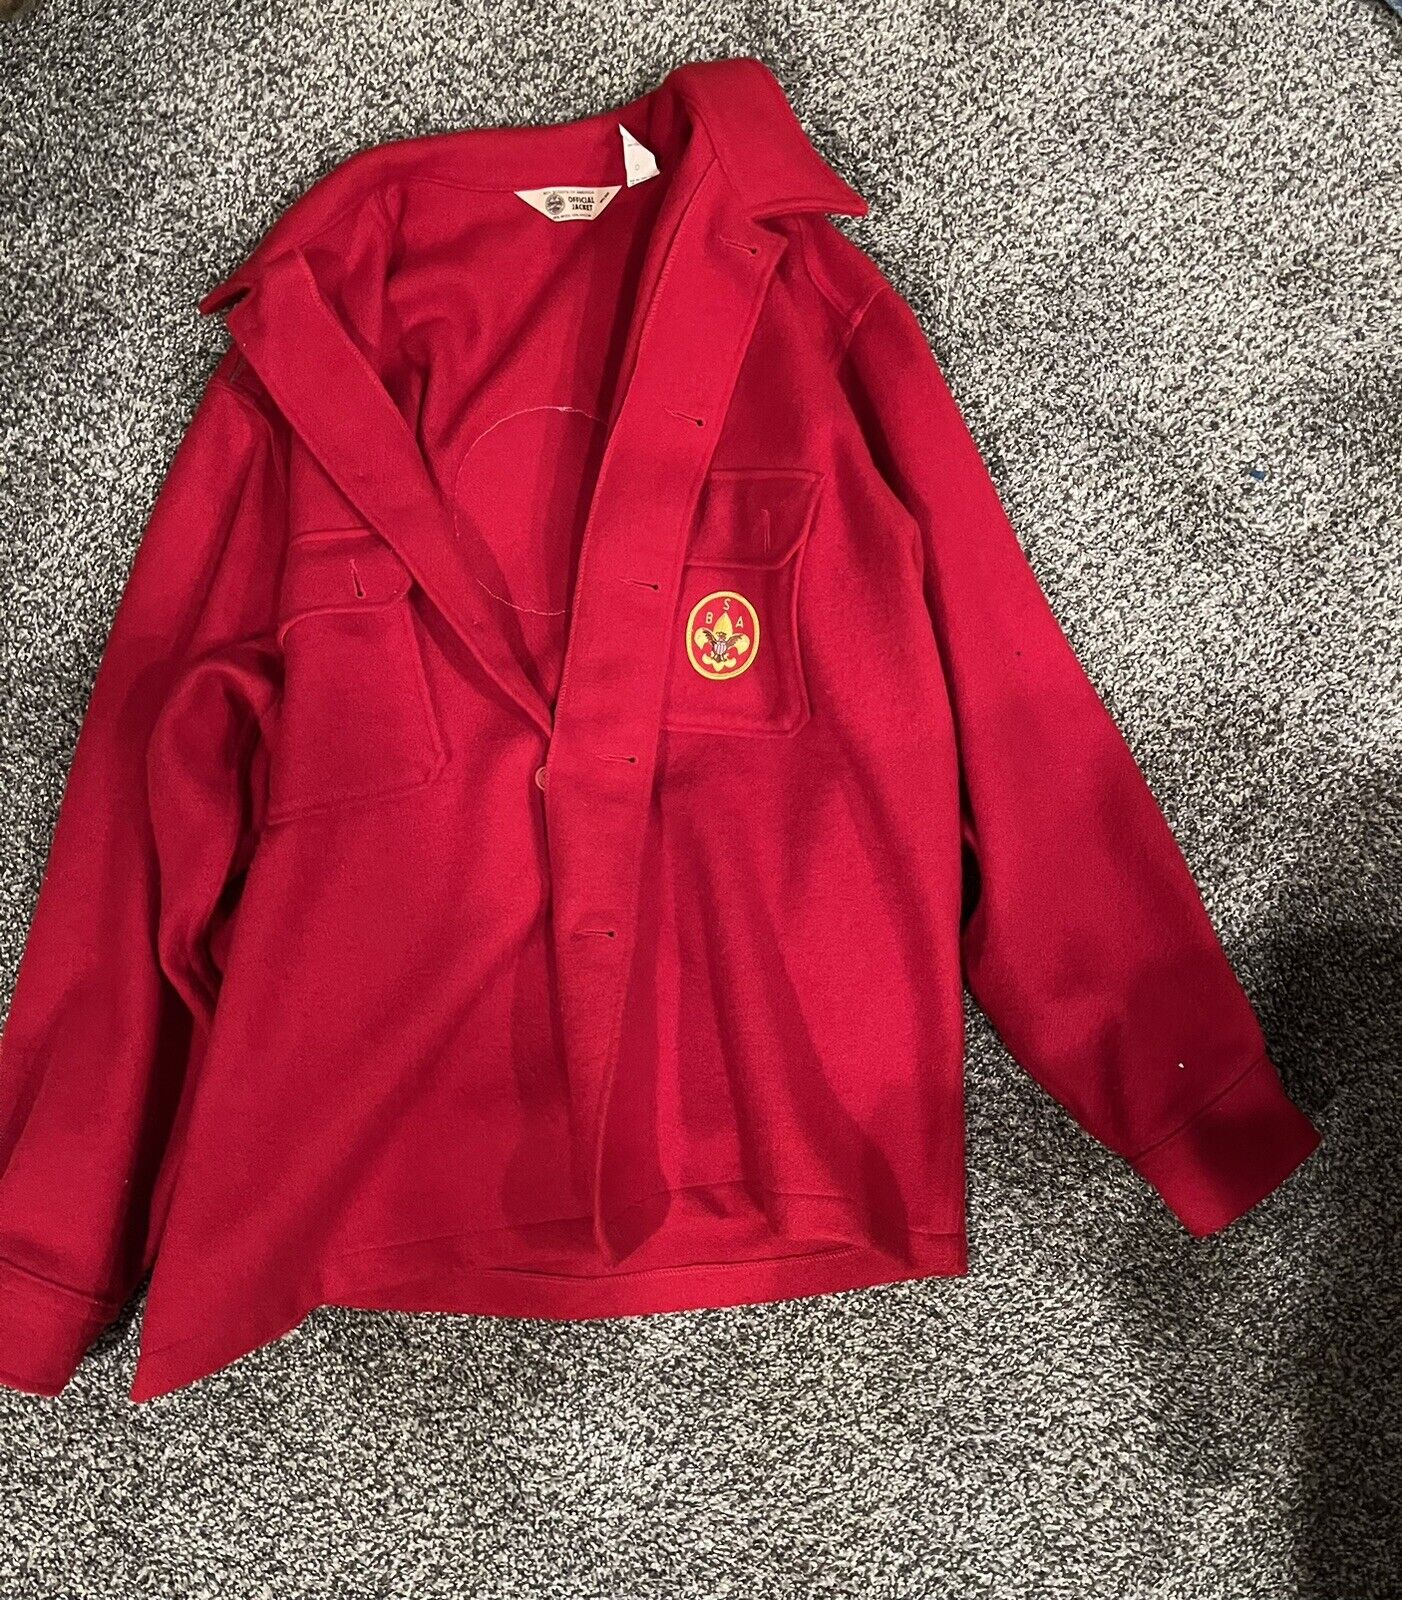 Boy Scouts of America Vintage Wool Blend Official Jacket Red Men's Size XL